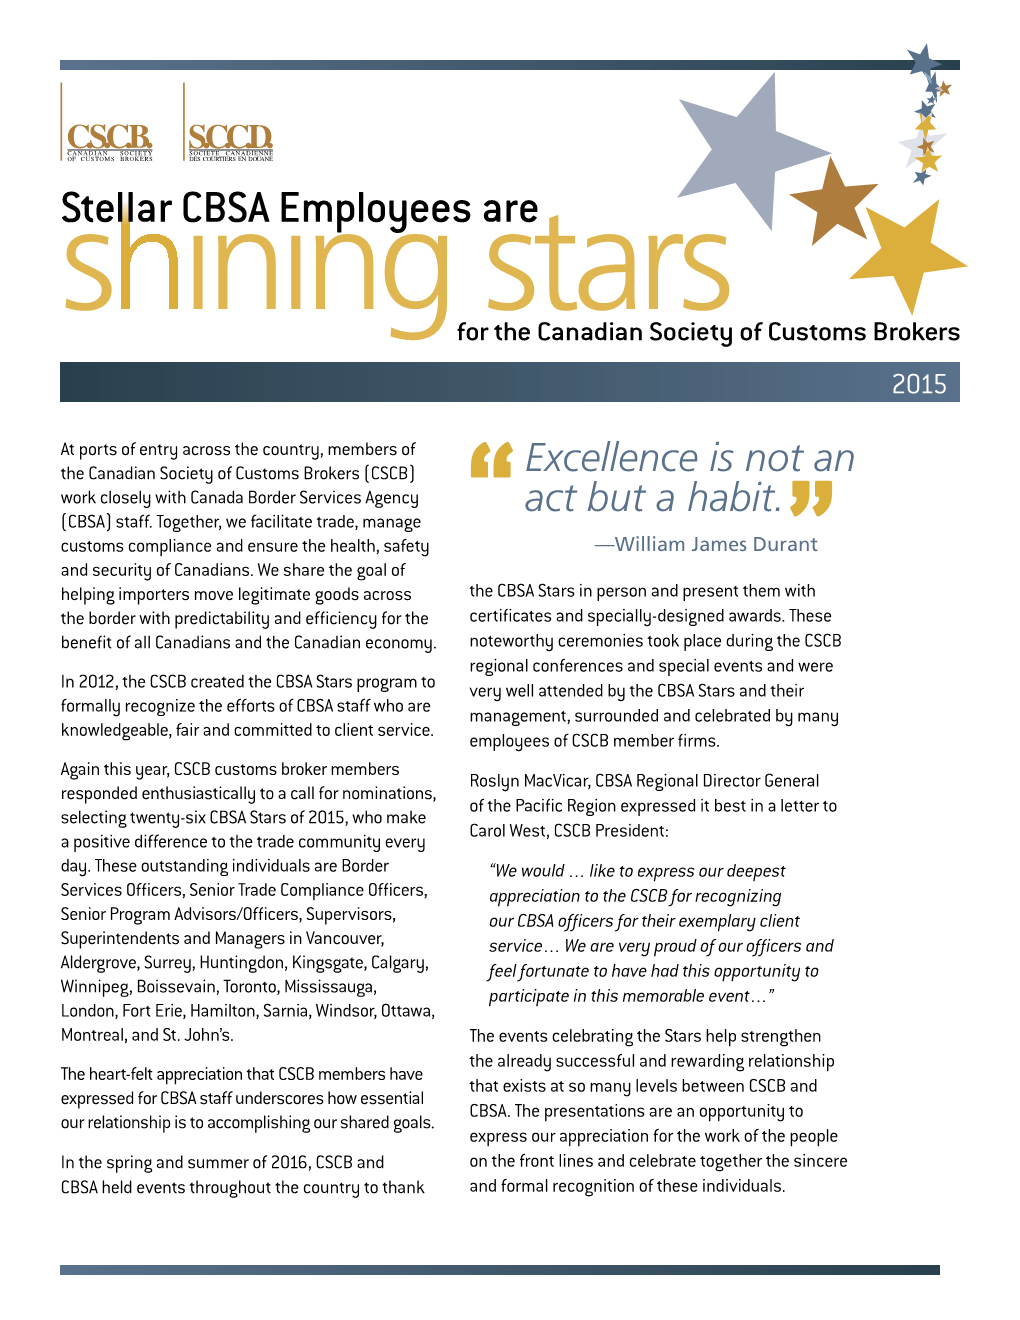 Stellar CBSA Employees Are Shining Stars for the Canadian Society Of